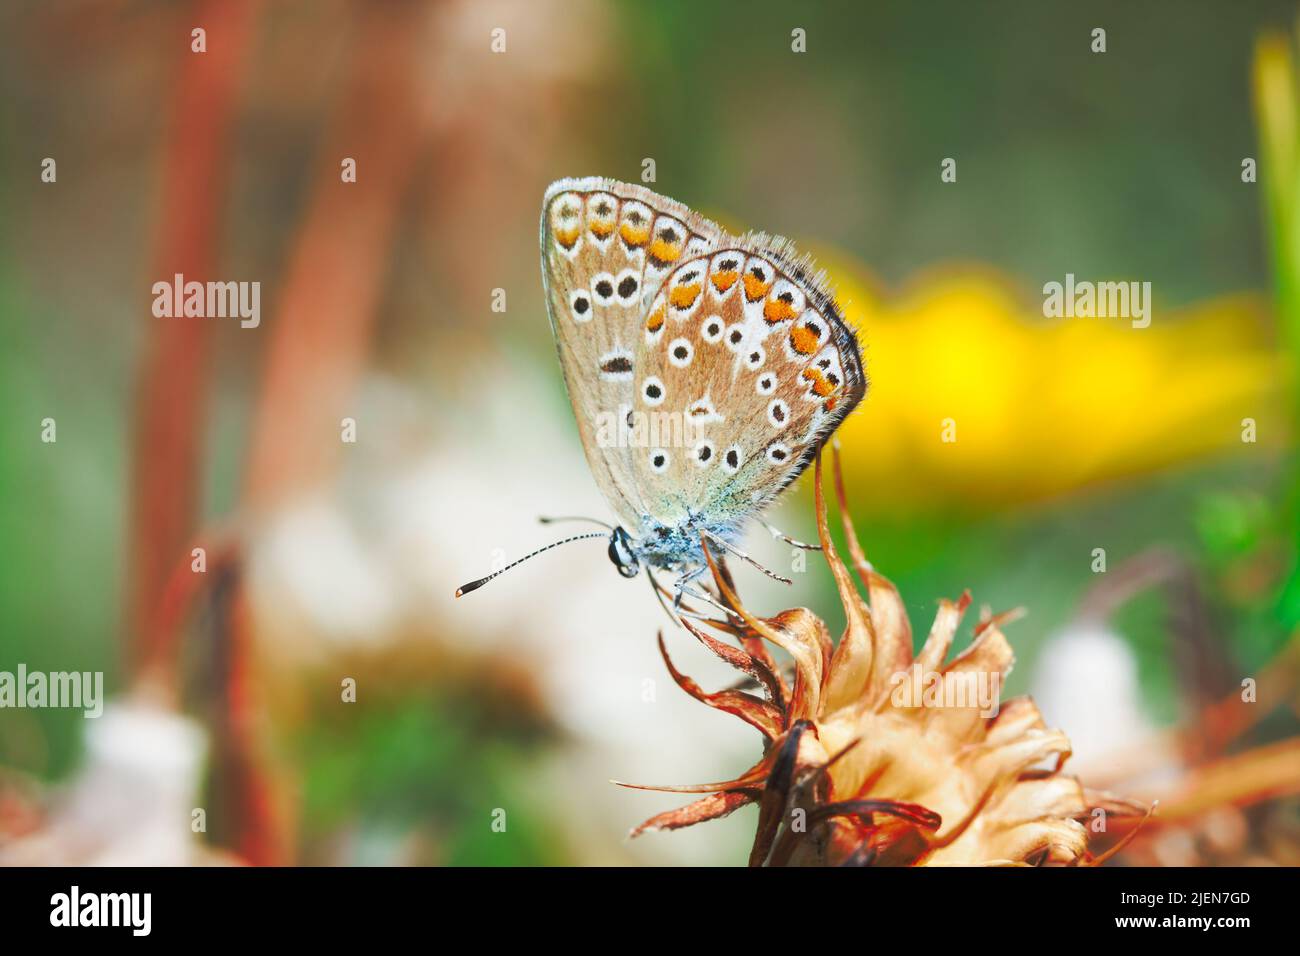 Plebejus argus, Silver Studded Blue common European butterfly in a meadow Stock Photo